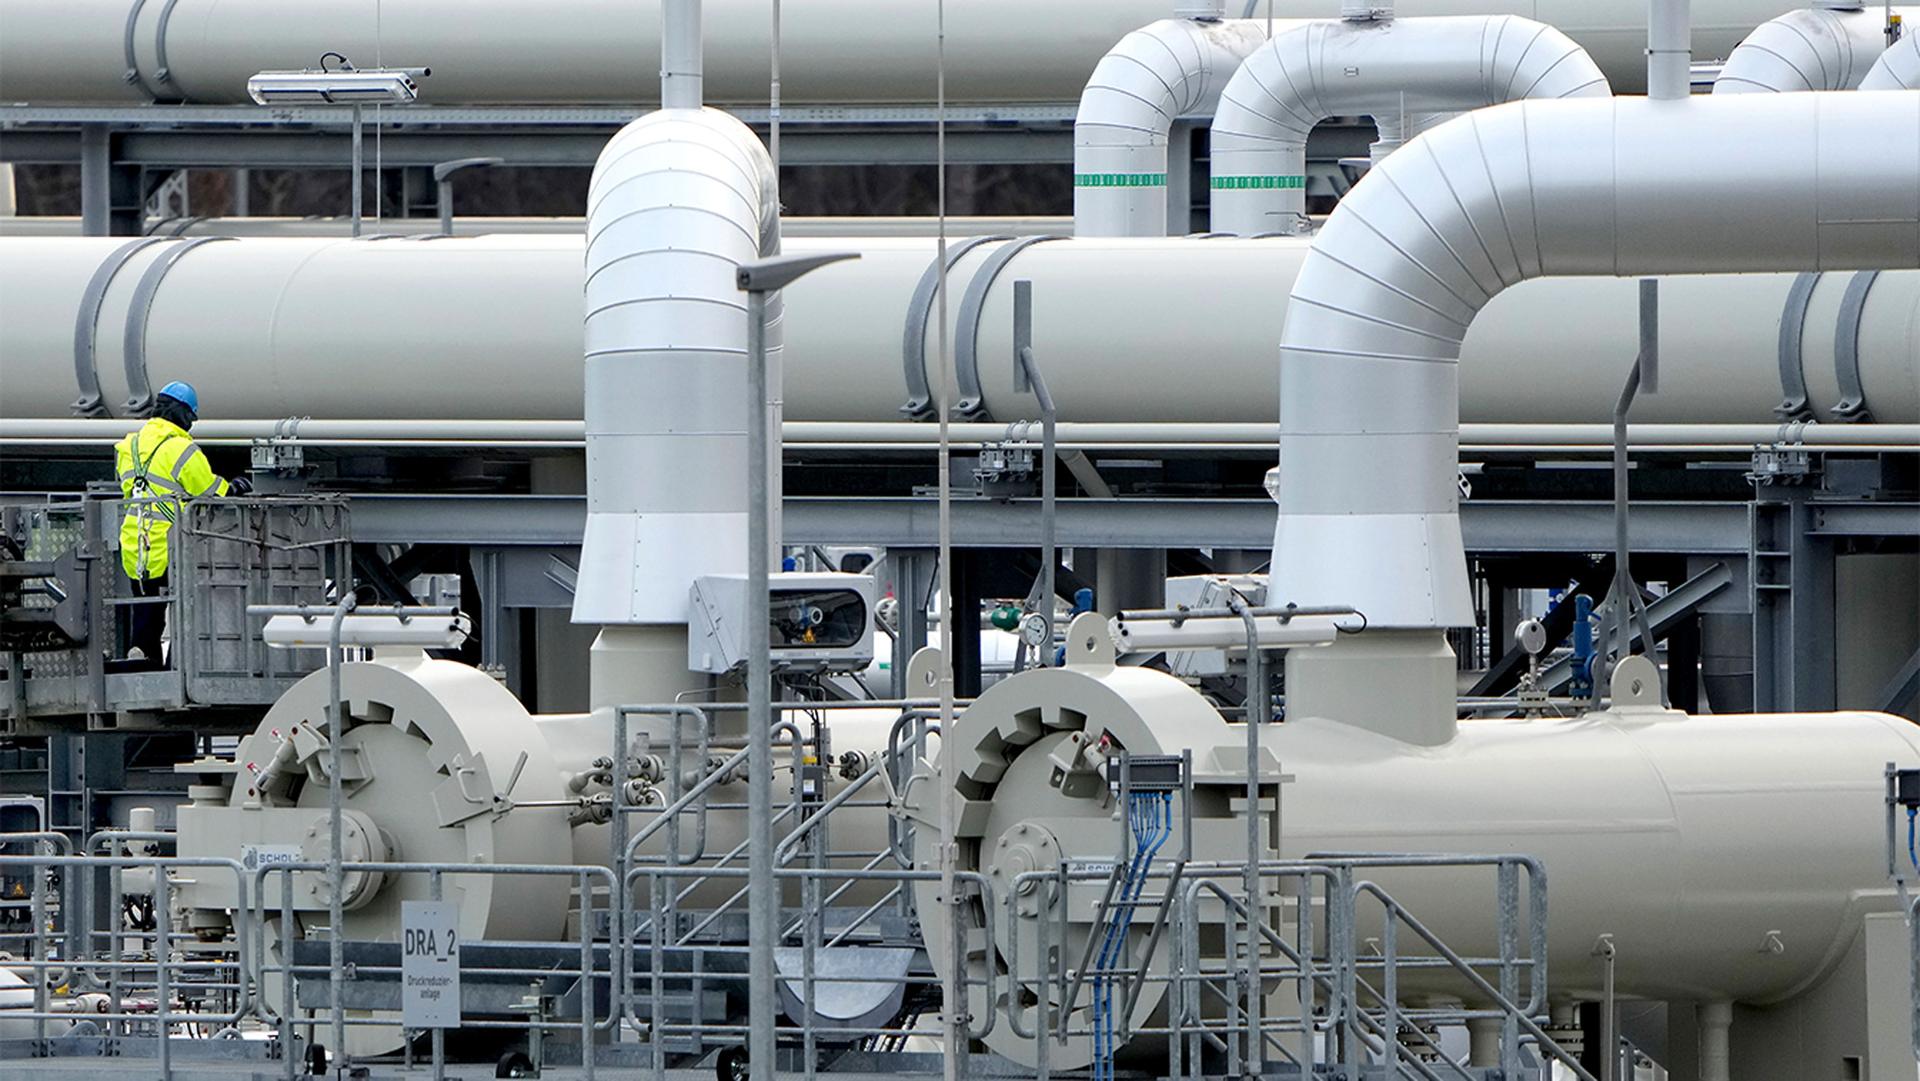 Pipes at the landfall facilities of the 'Nord Stream 2' gas pipeline are pictured in Lubmin, northern Germany